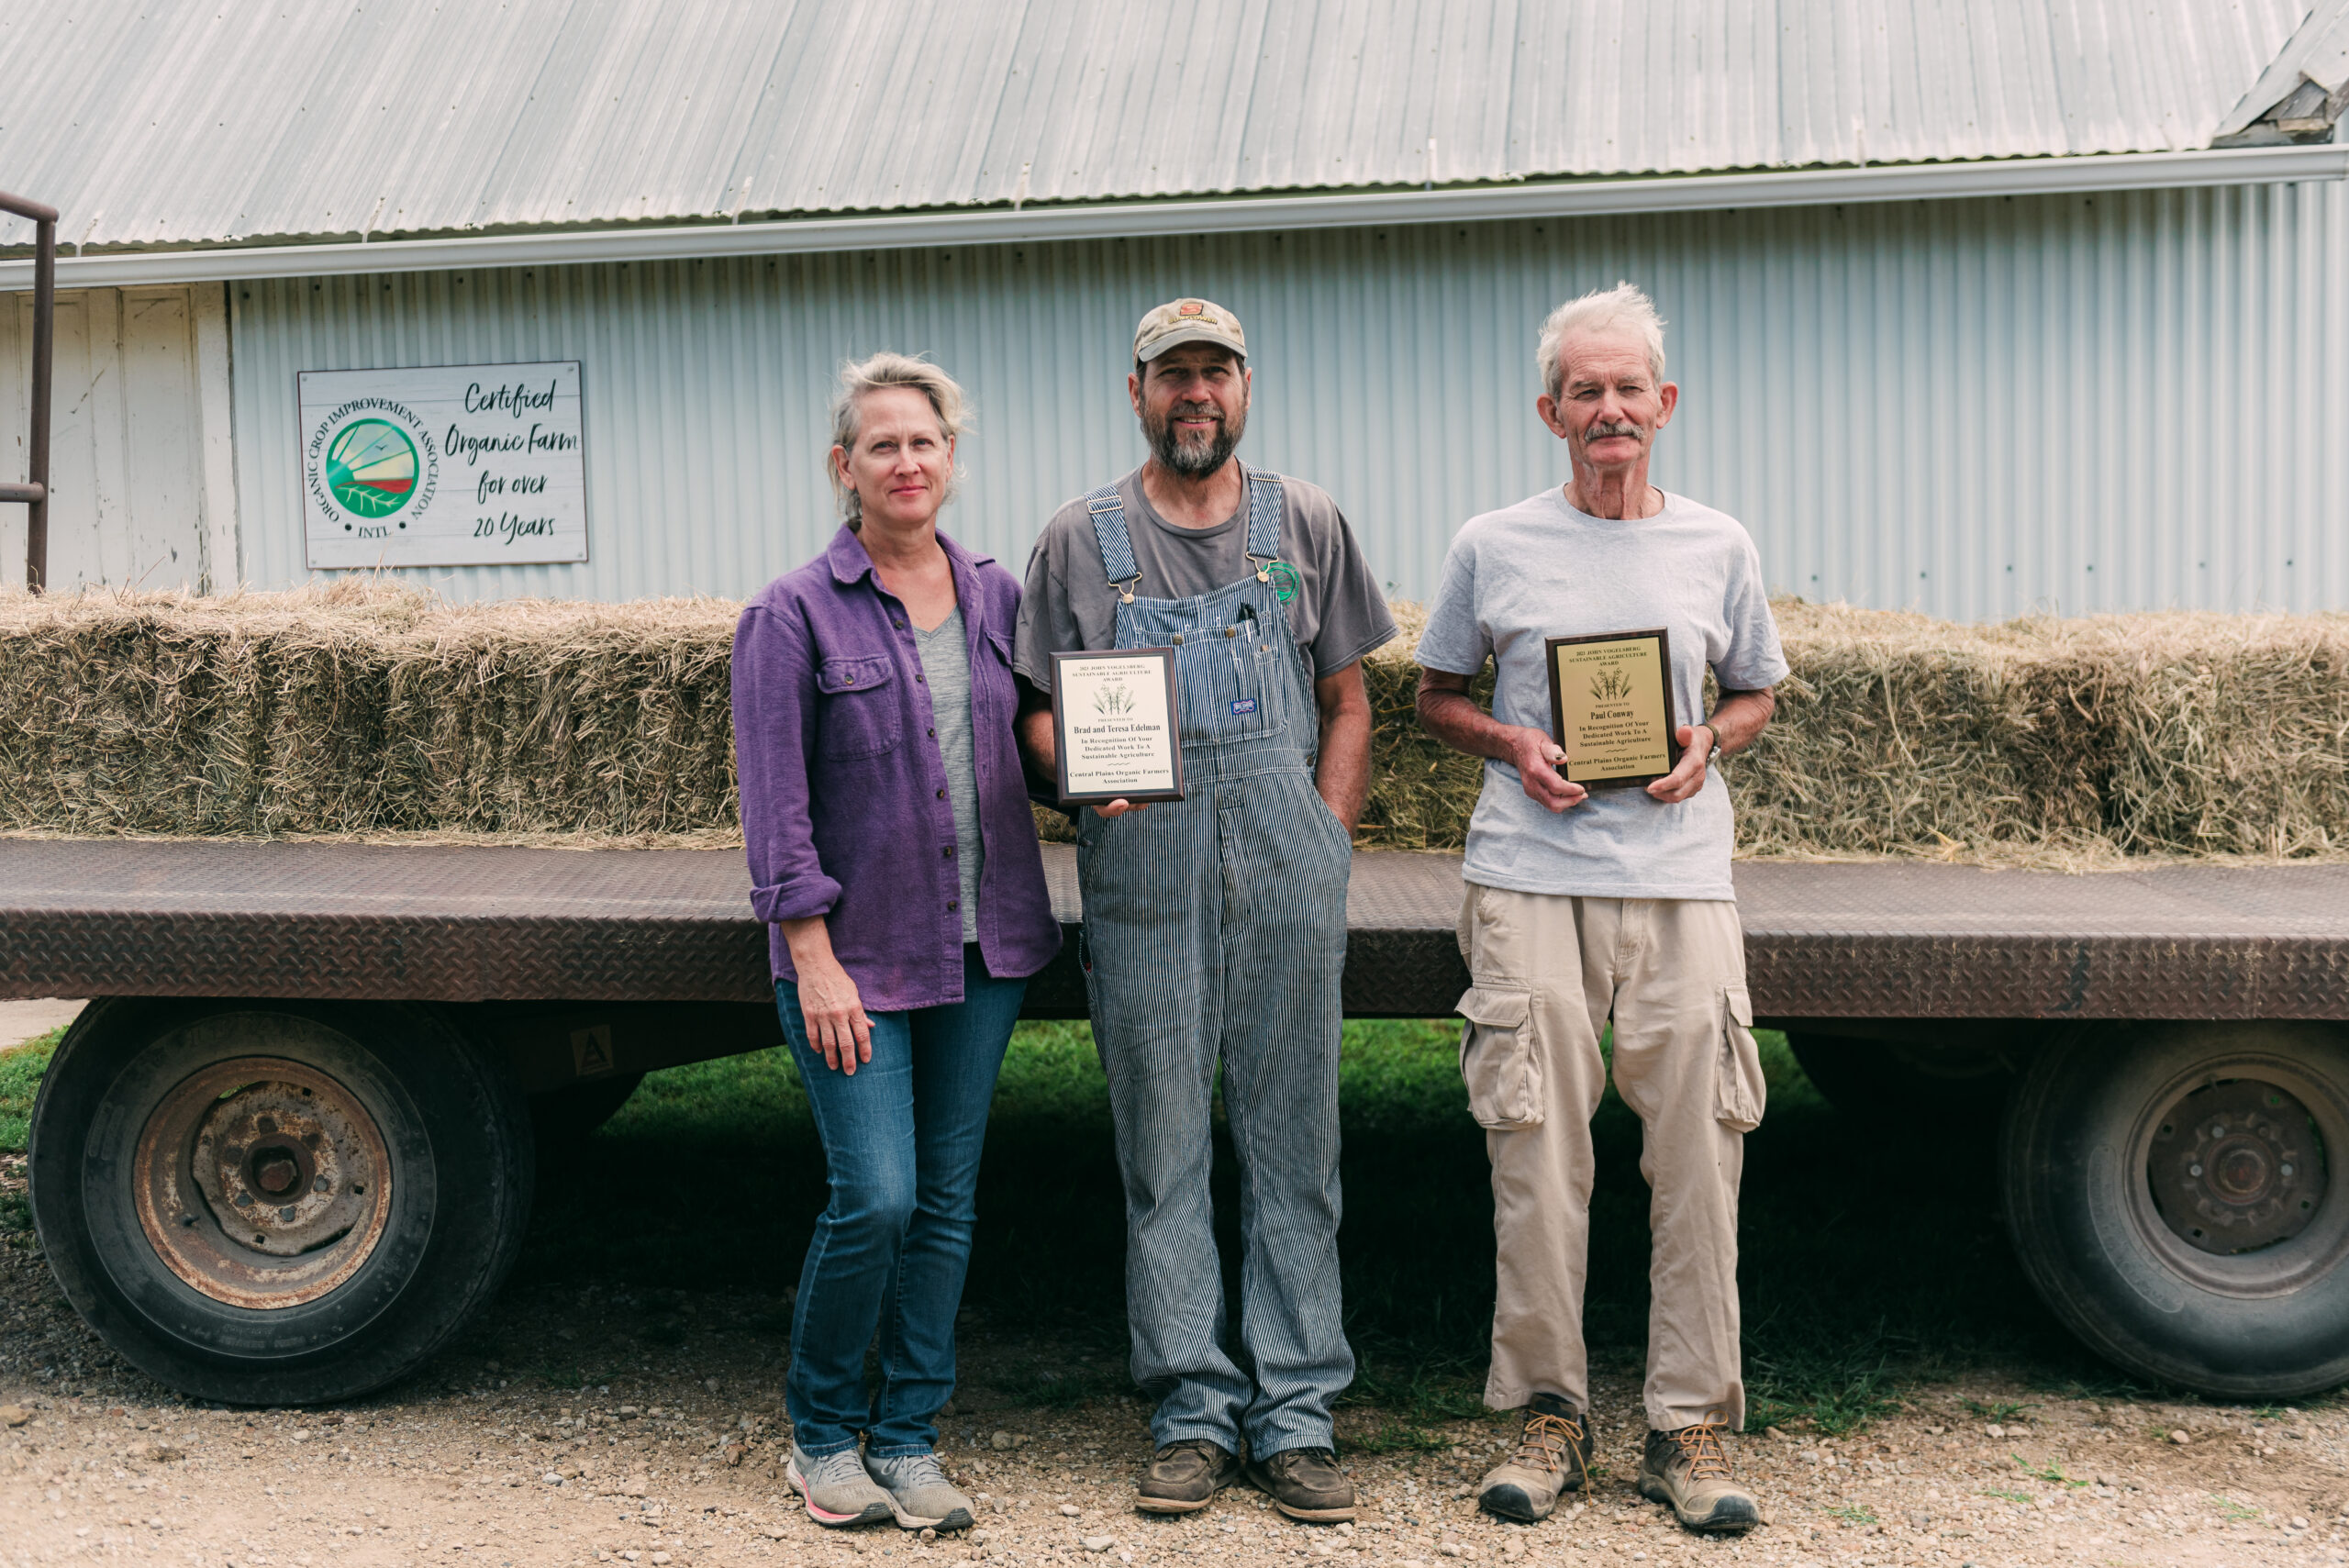 Award for sustainable farming practices given